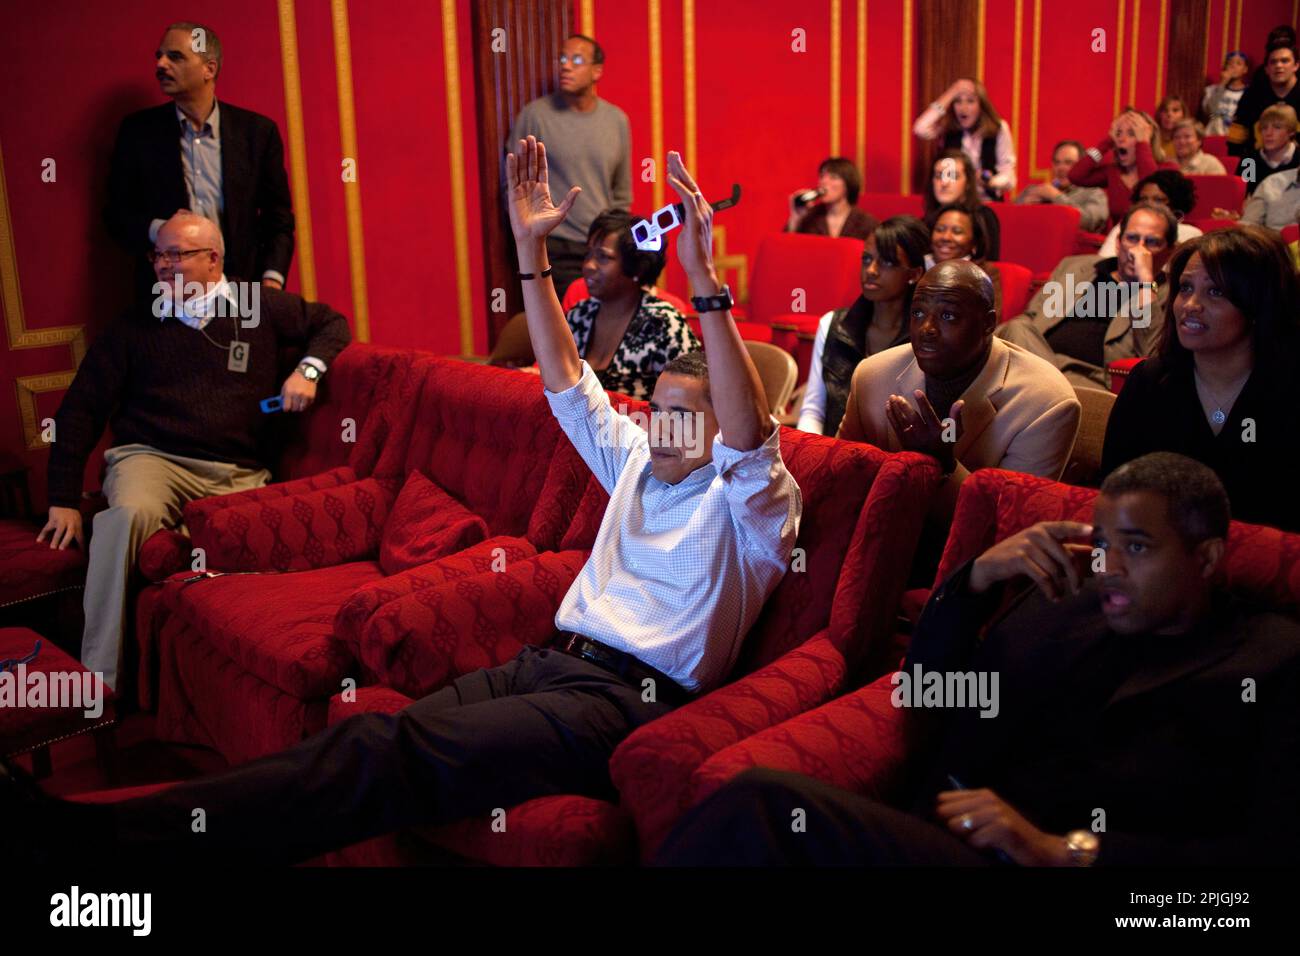 President Barack Obama holds 3-D glasses while watching the Super Bowl game at a Super Bowl Party in the family theater of the White House. Guests included family, friends, staff members and bipartisan members of Congress, 2/1/09. .Official White House Photo by Pete Souza Stock Photo